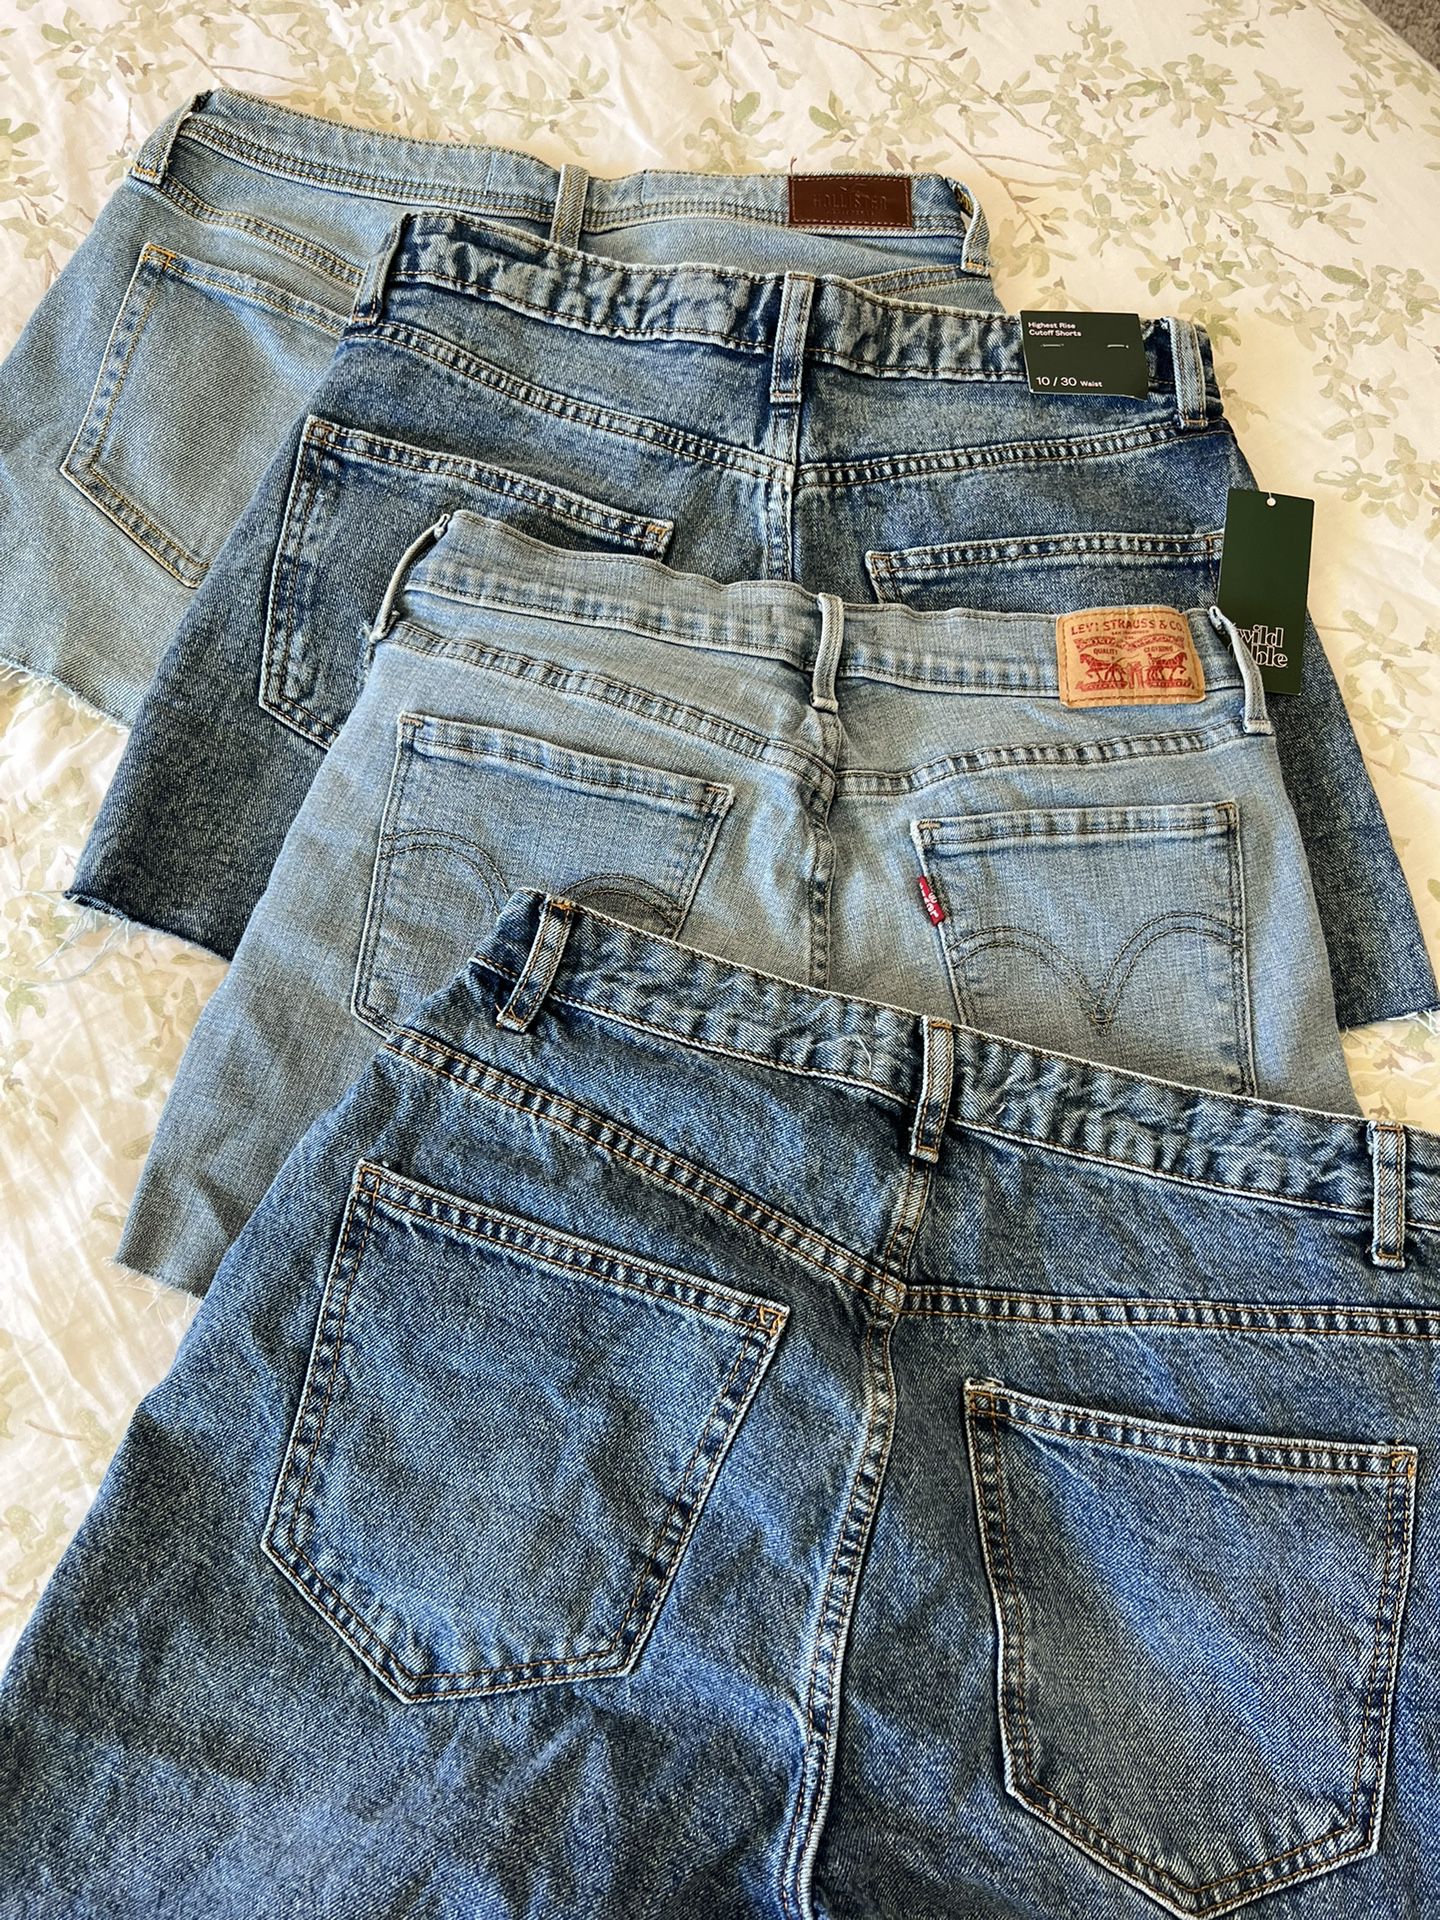 Jean Shorts! Levis, Target, Cotton On & Hollister for Sale in Moreno  Valley, CA - OfferUp